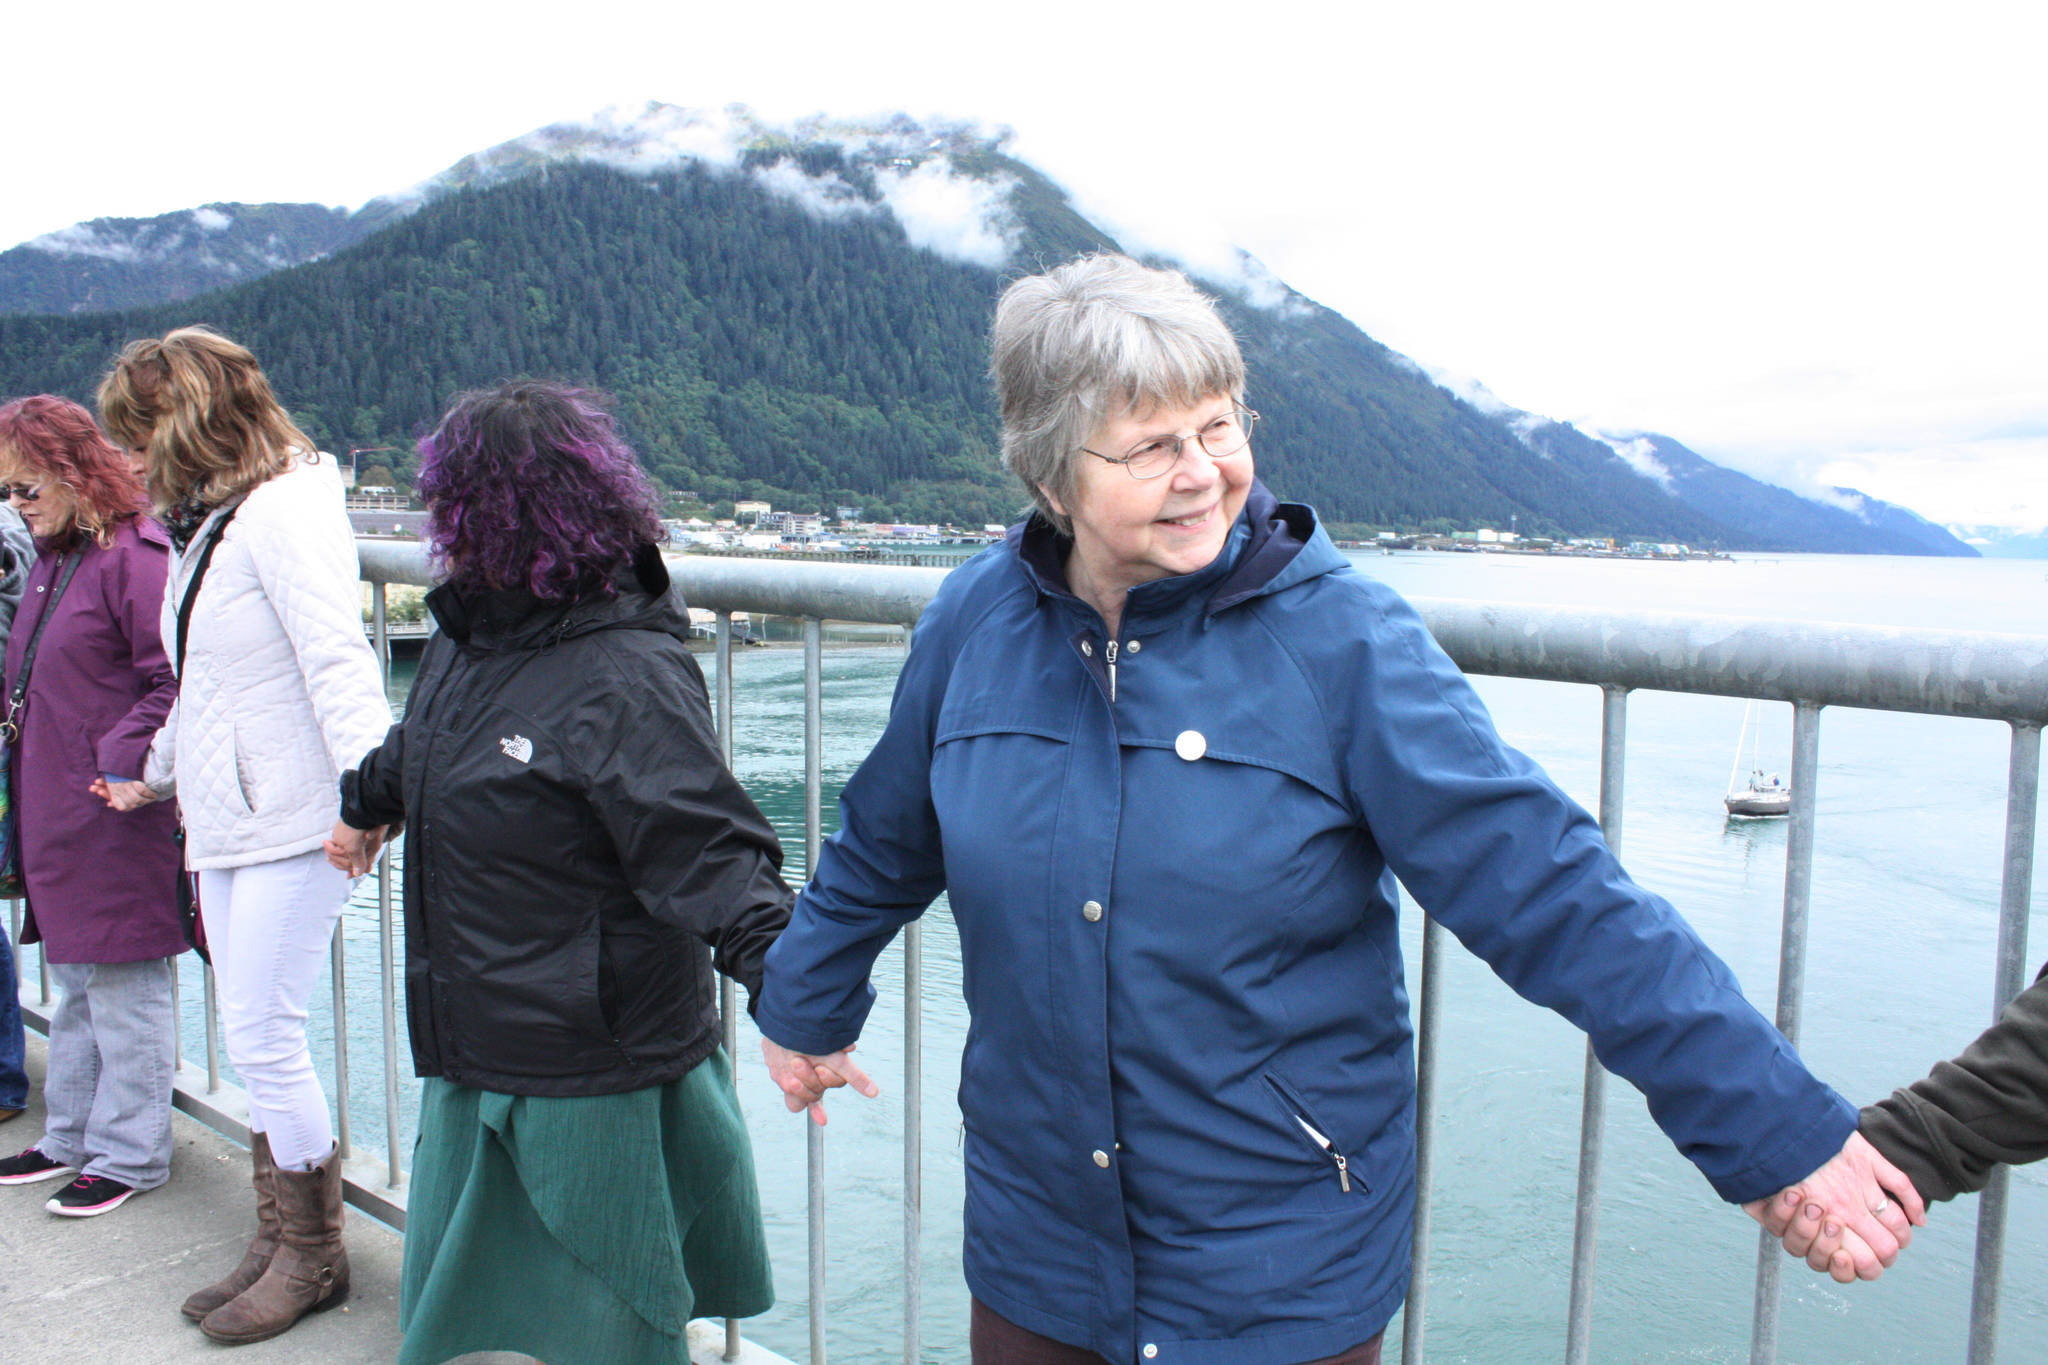 Sister Dee Sizler takes part reciting the Serenity Prayer on Sept. 18 at the Hands Across the Bridge event. (Erin Laughlin | For the Juneau Empire)